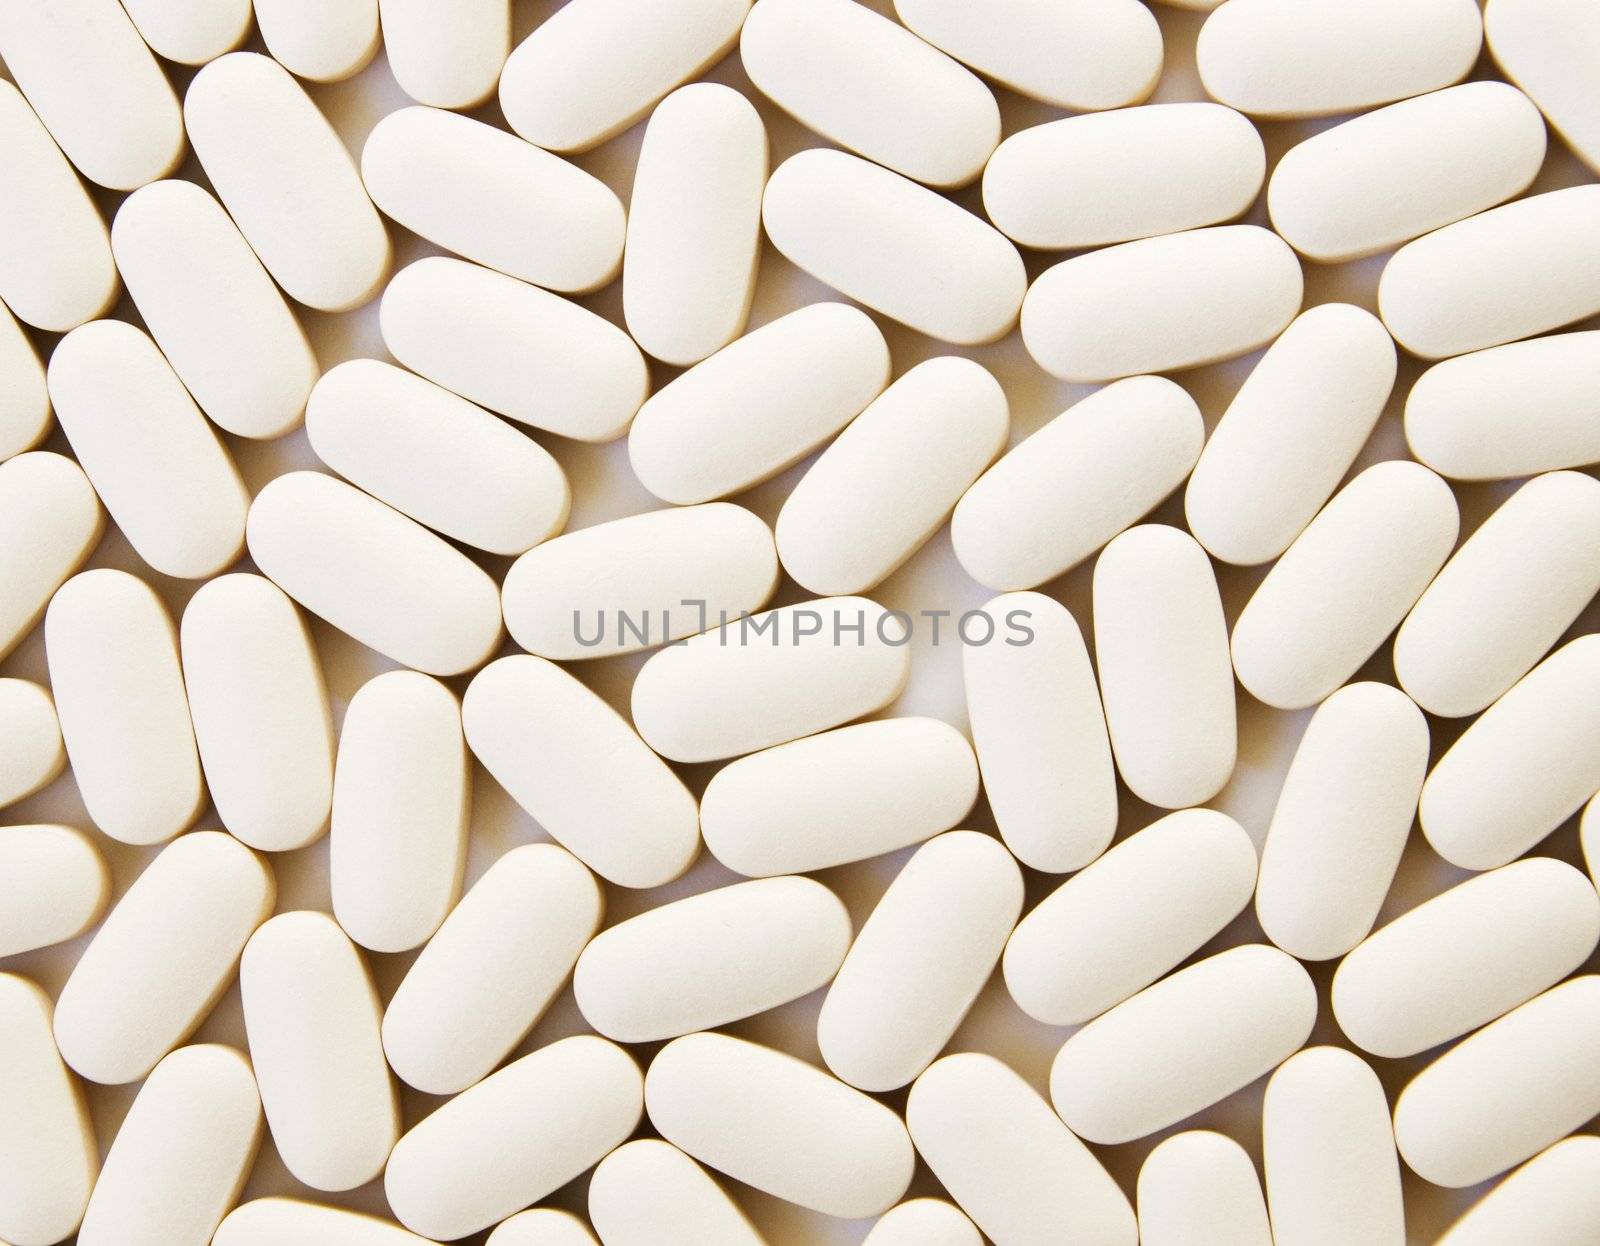 Daily Vitamins on a White Background Fill the Shot.